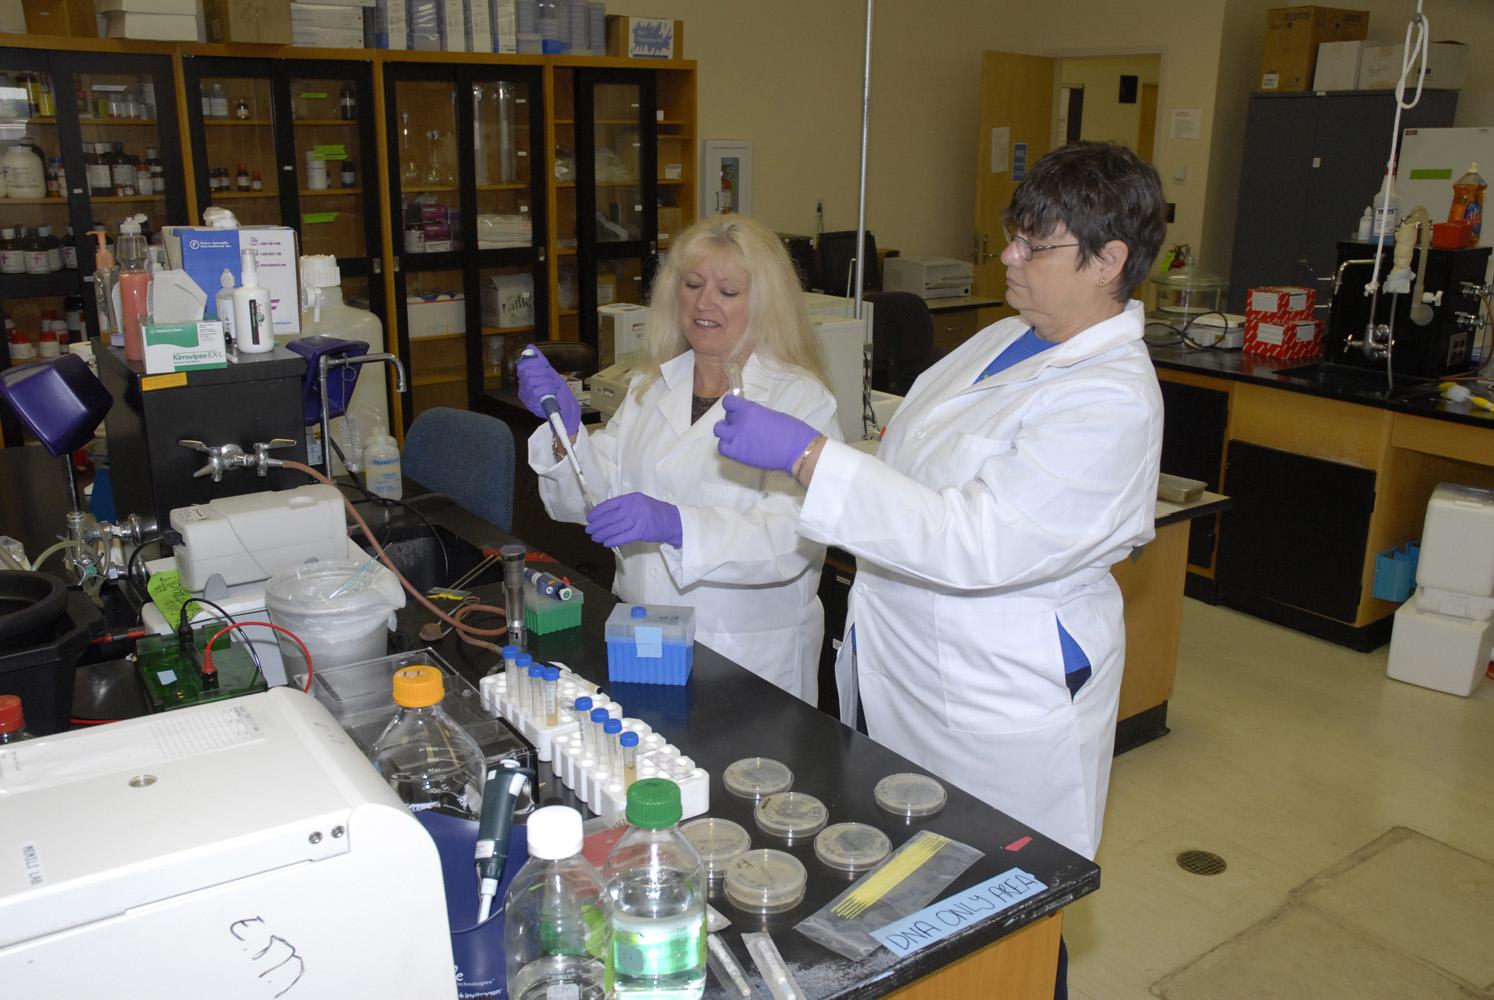 Eighth-grade science teachers Judy Harden of Saltillo (left) and Joan Estapa of Bay Saint Louis conduct experiments during an intense two-week course in functional genomics and biology at Mississippi State University. The teachers were taking part in a Research Experience for Teachers grant under the supervision of an associate professor in MSU's Department of Animal and Dairy Science. (Photo by MSU Ag Communications/Linda Breazeale)